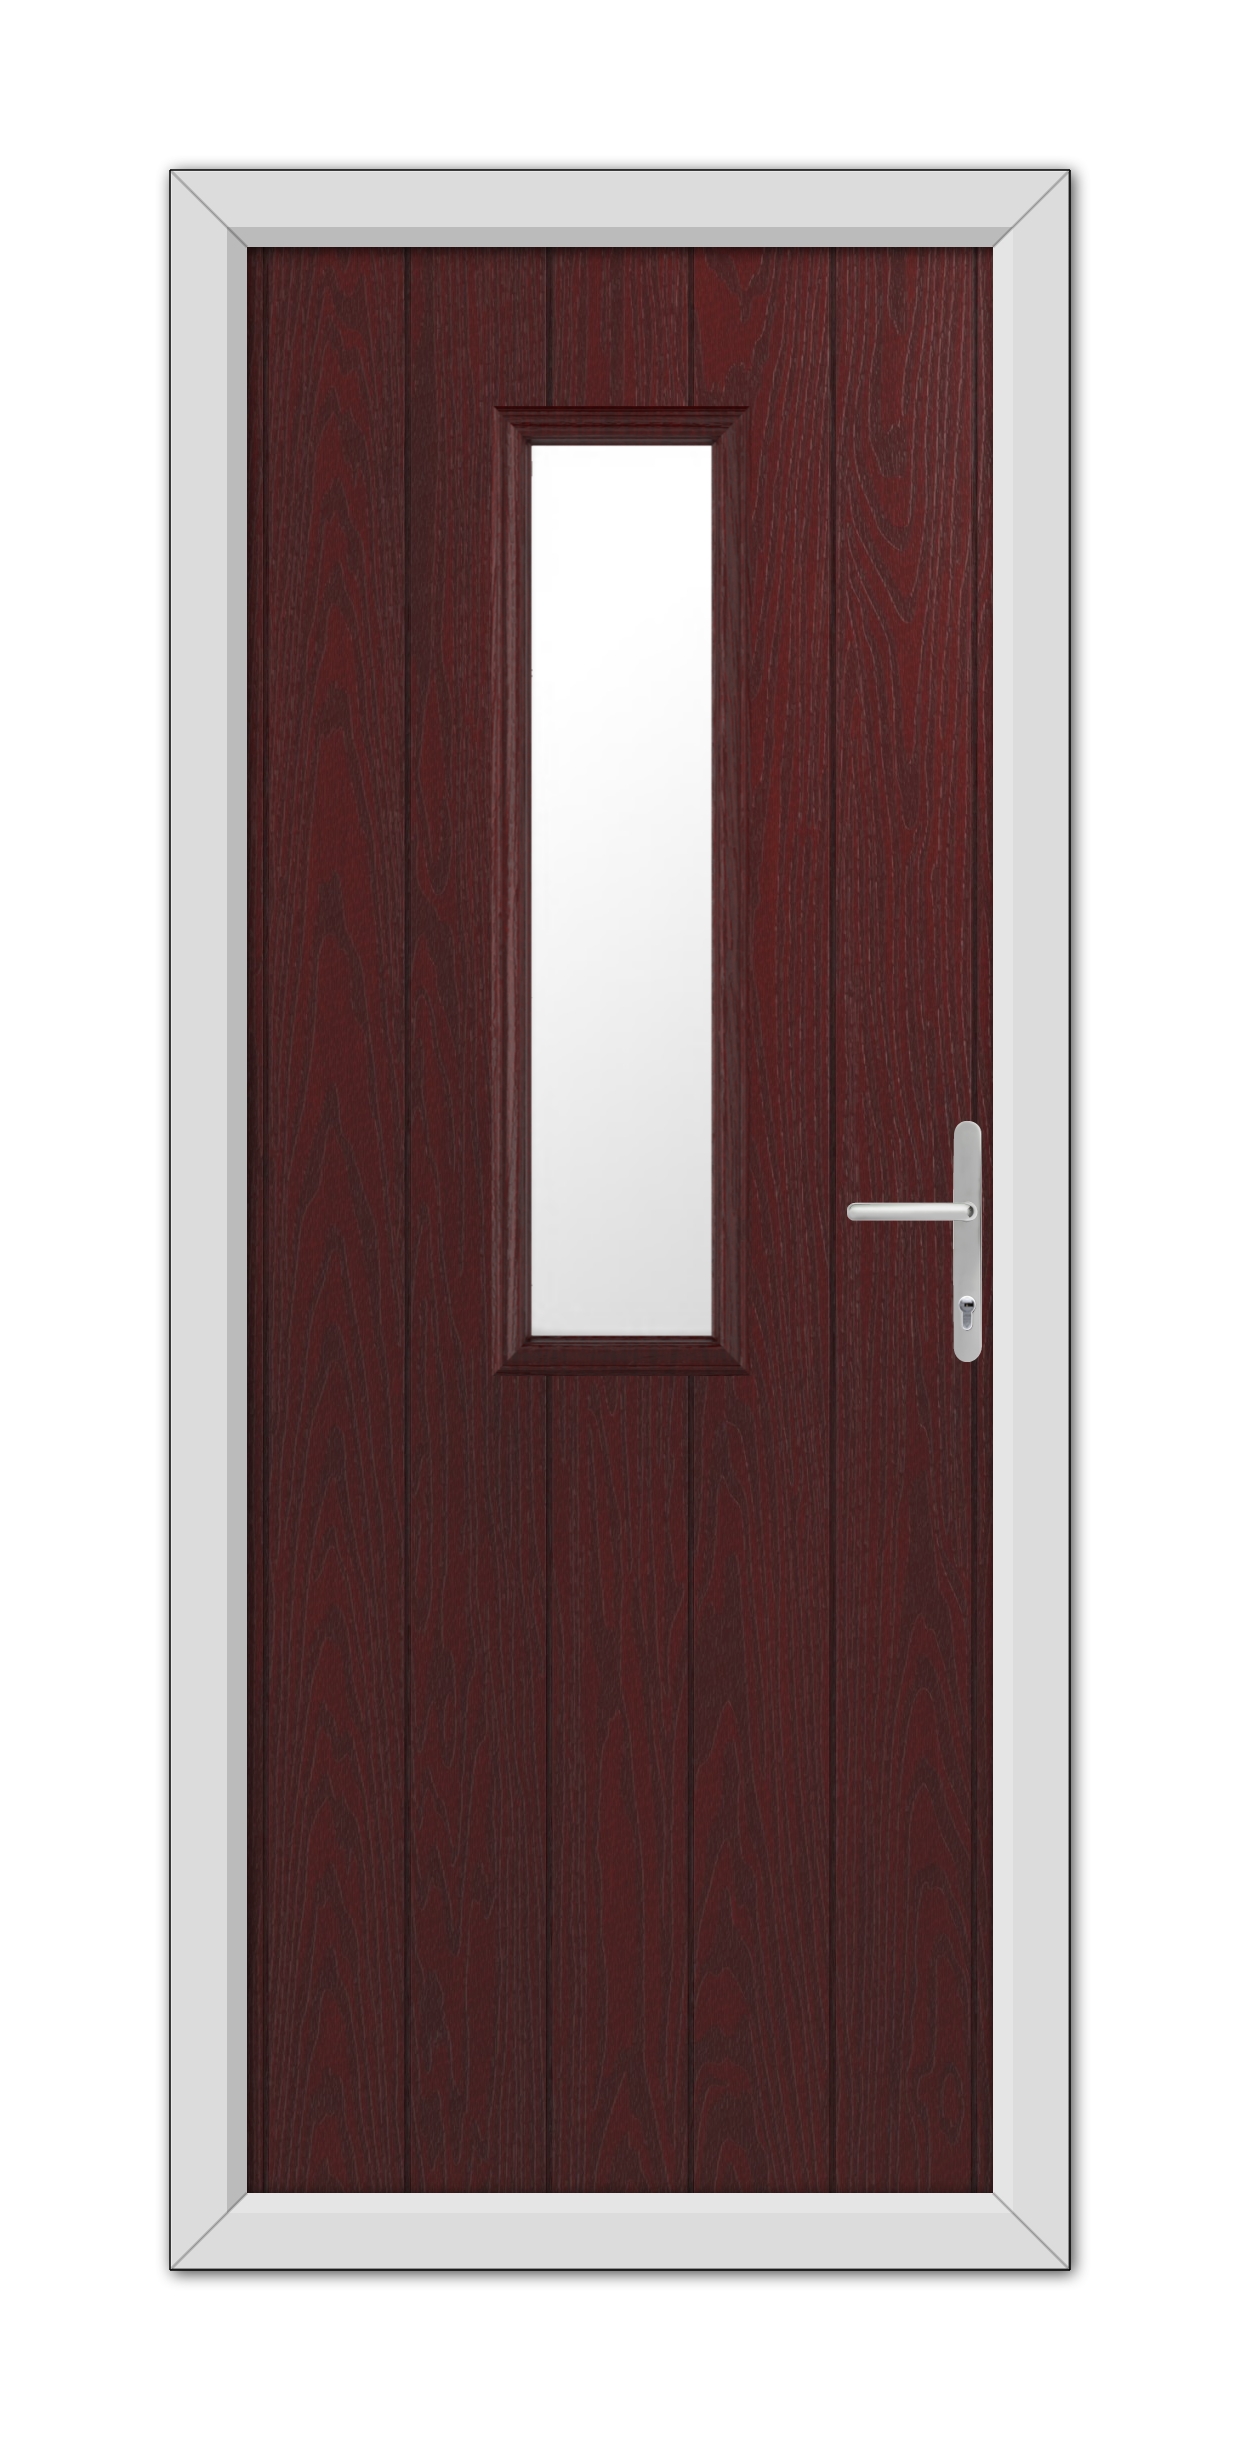 A Rosewood Mowbray Composite Door with a rectangular window and a white handle, set within a white frame.